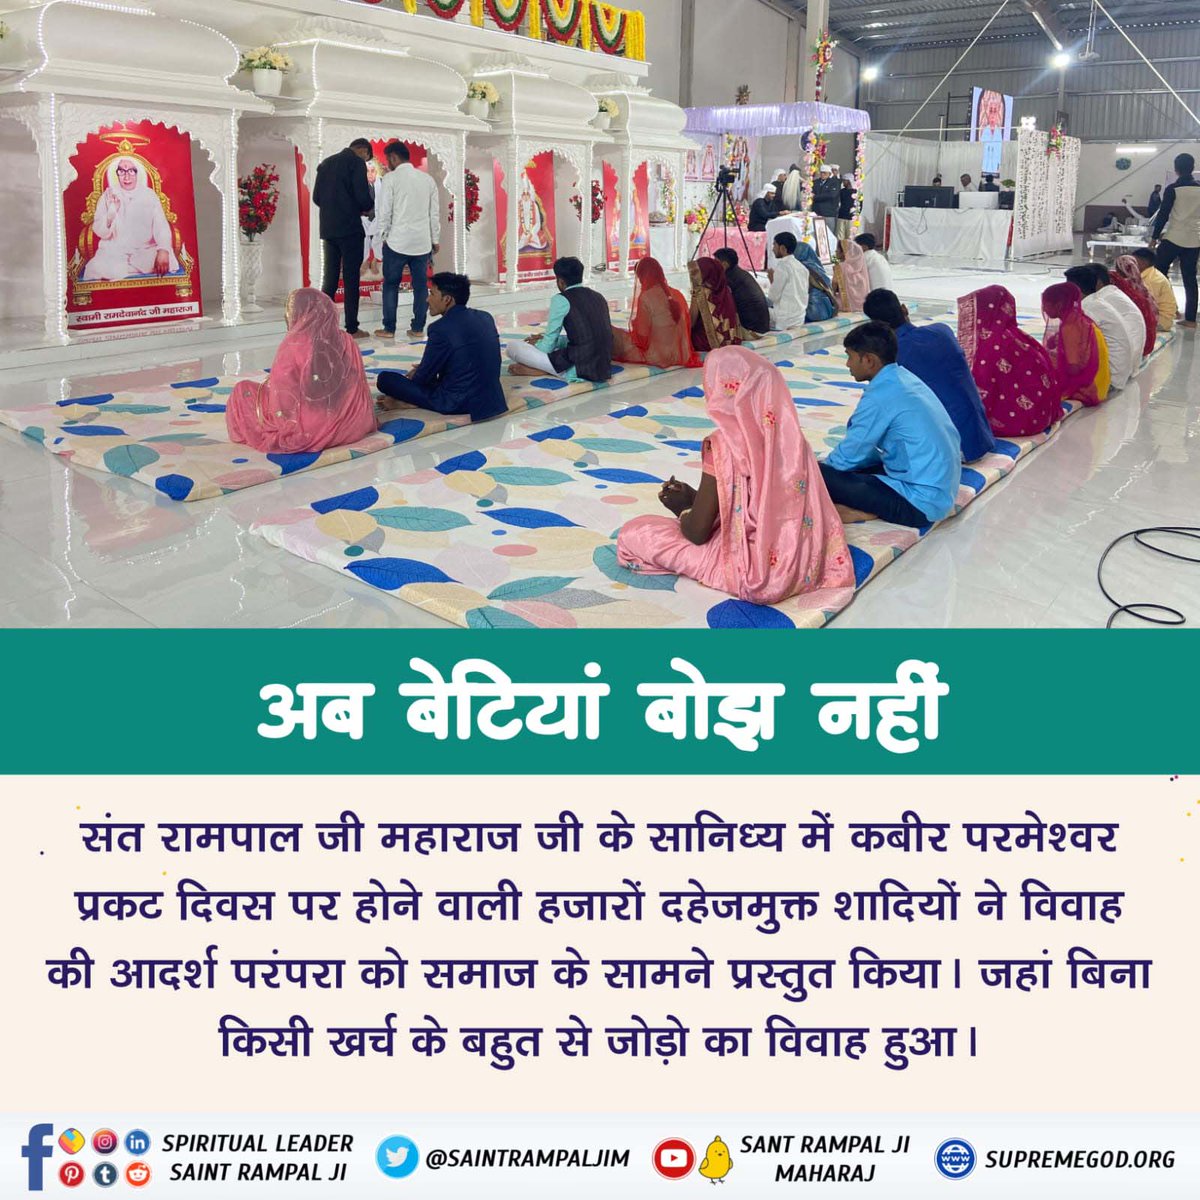 #दहेज_दानव_का_अंत_हो
While some resort to suicide due to dowry demands, Sant Rampal Ji Maharaj is playing the role of the biggest social reformer, eliminating the evil of dowry through knowledge.
#GodNightFriday